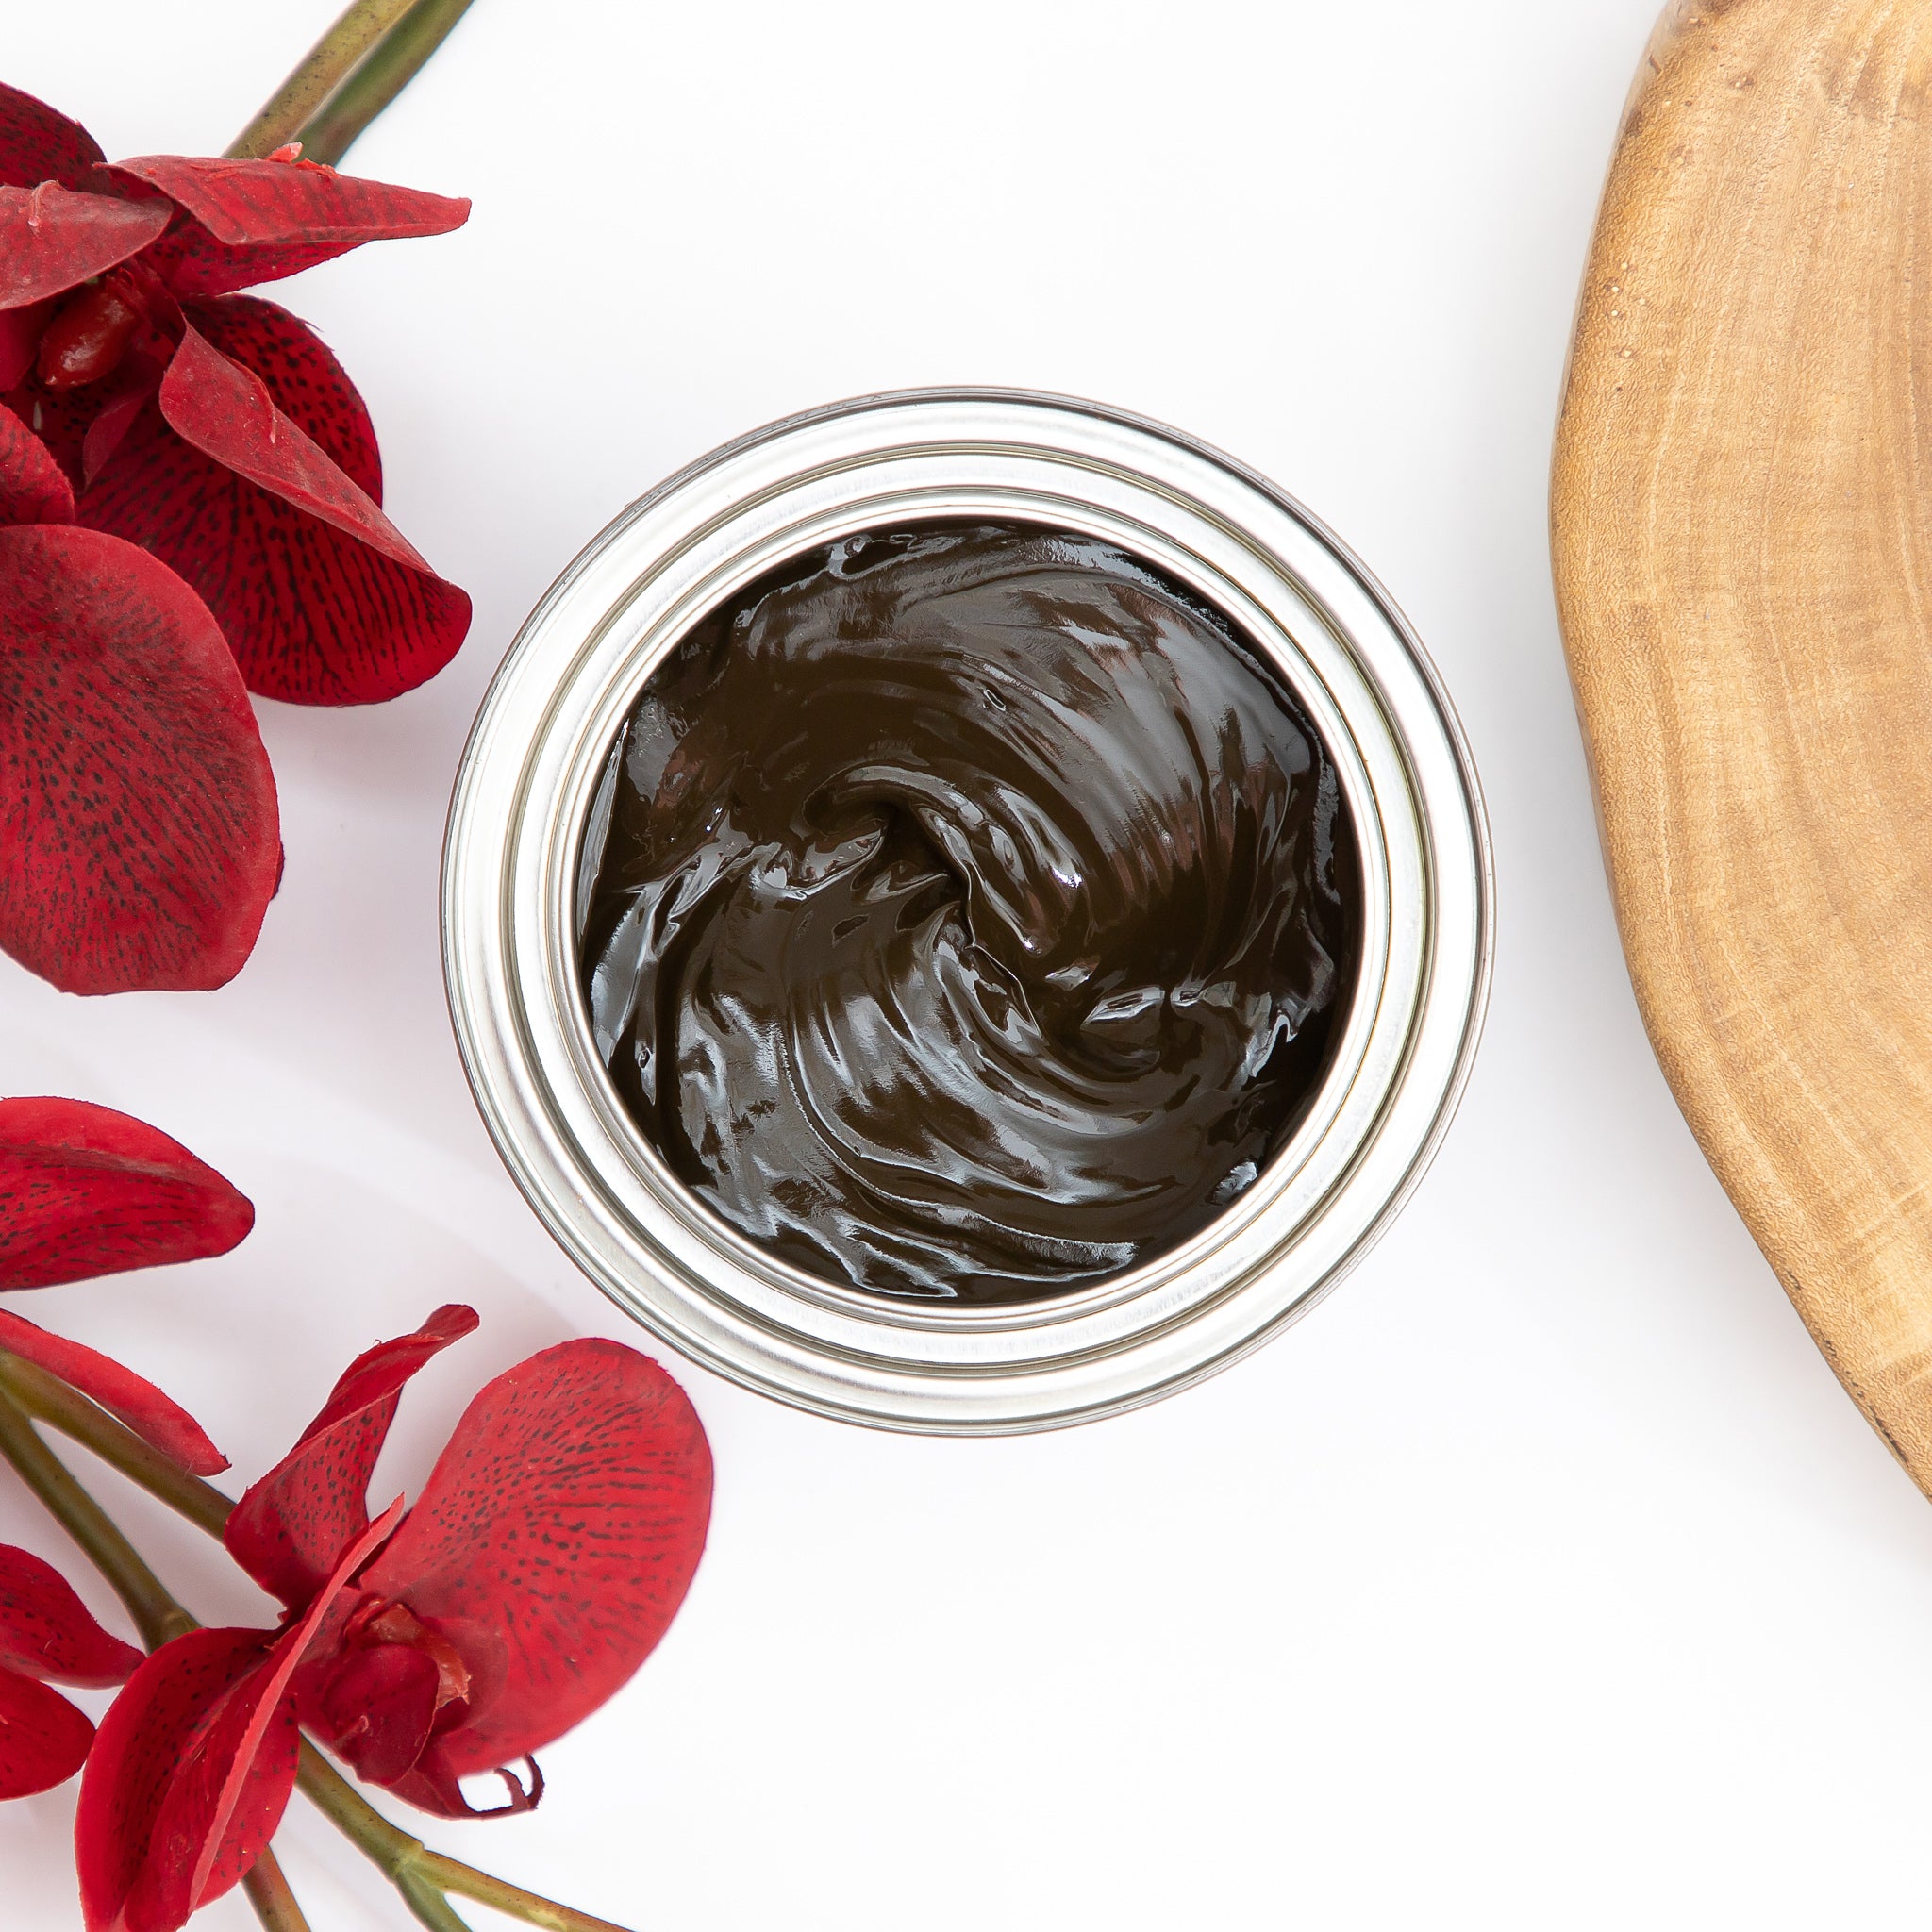 A arial view of an open can of Dixie Belle's No Pain Gel Stain is against a white background. To the left of the can is red silk flowers.